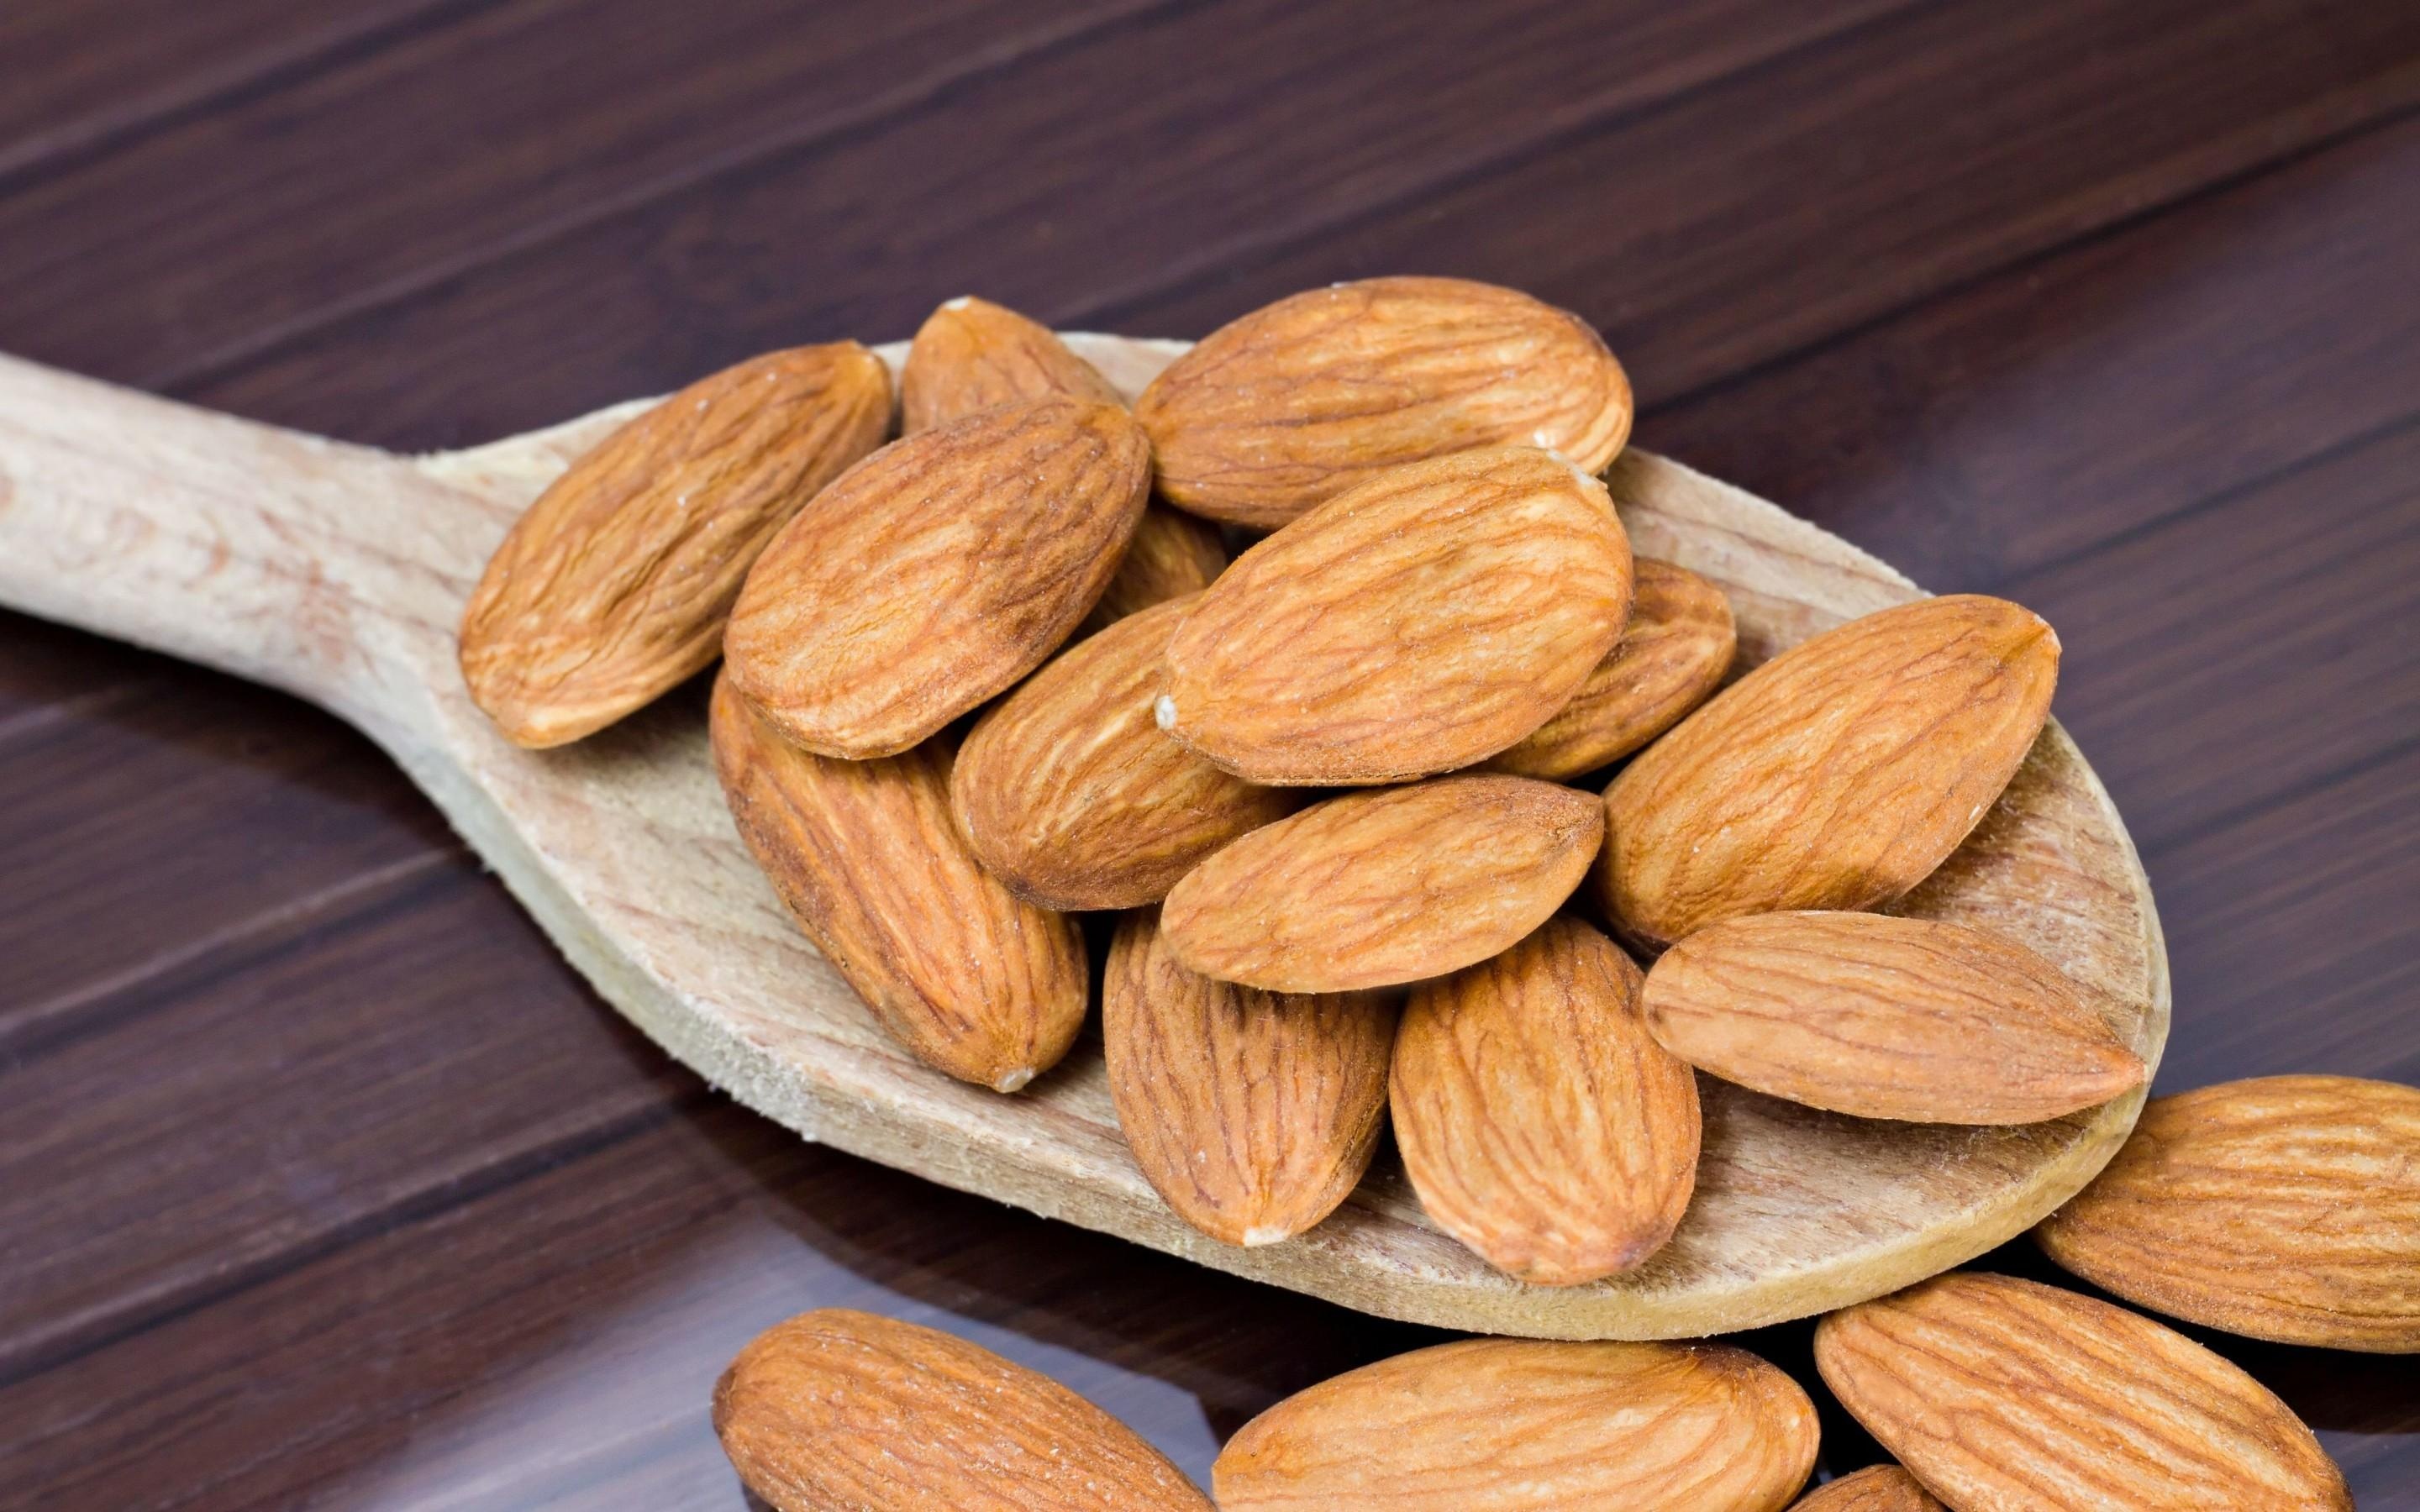 Almonds: Providing a range of essential nutrients, A drupe fruit produced by the almond tree. 2880x1800 HD Wallpaper.